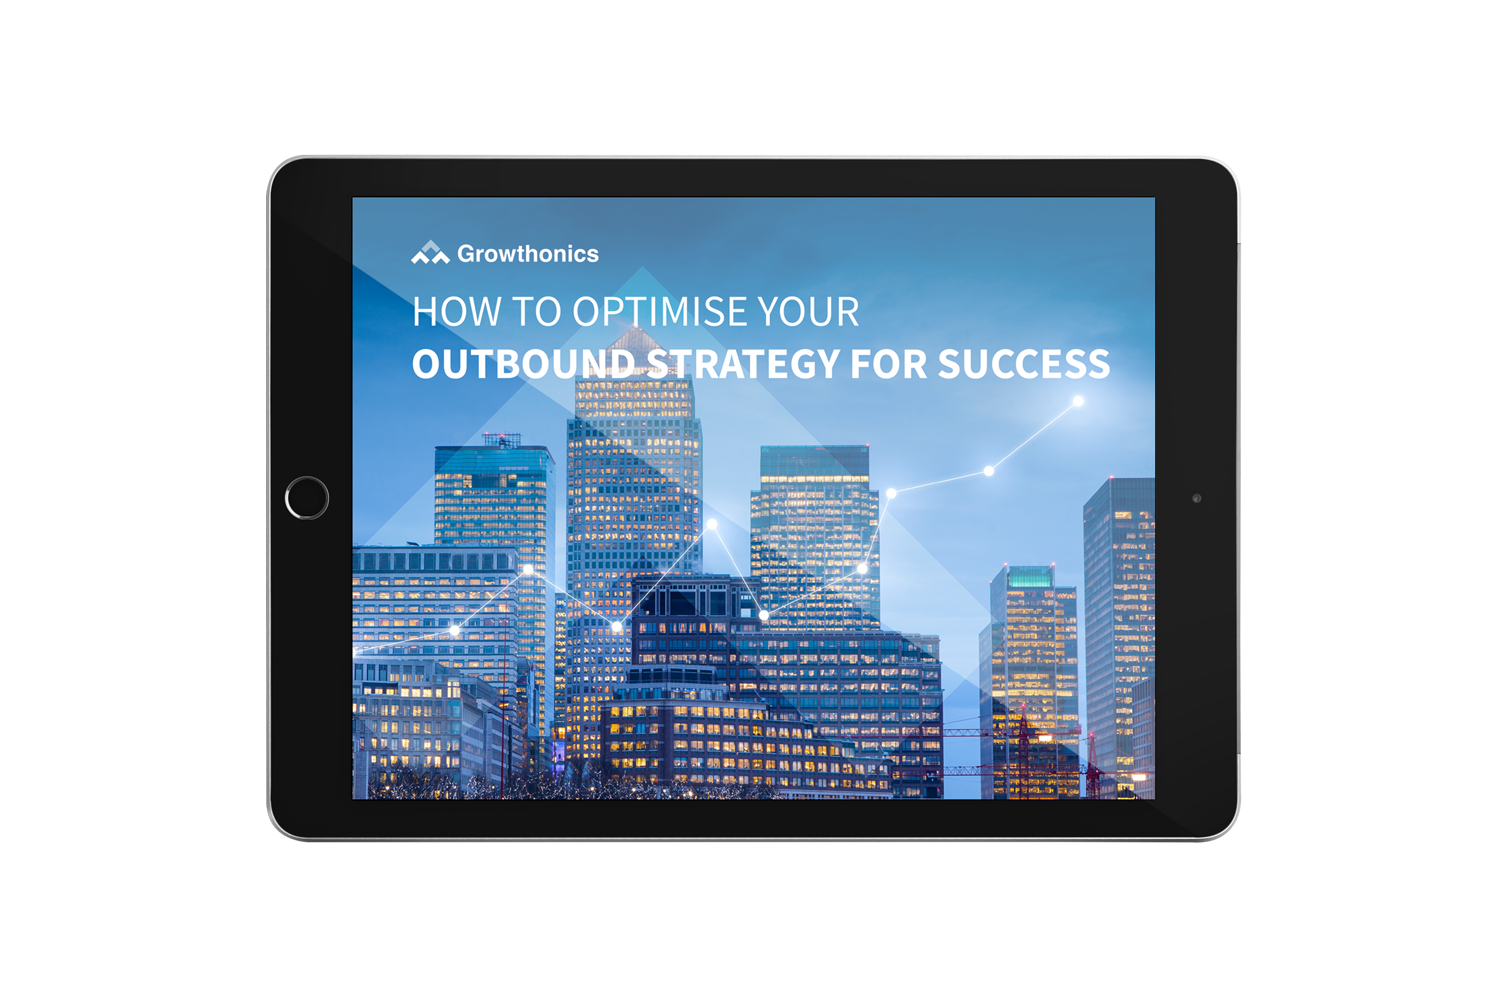 How to optimise your outbound strategy